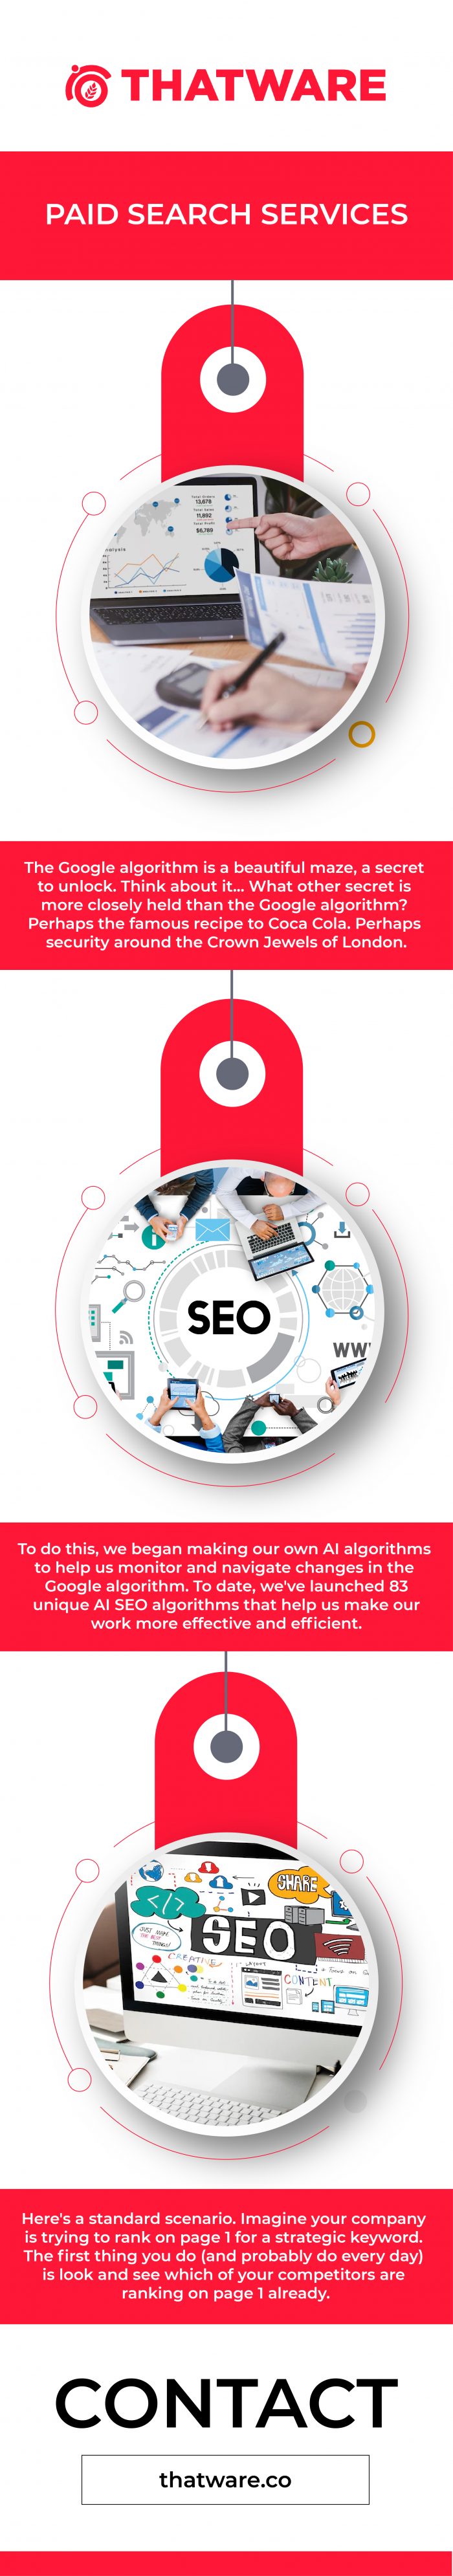 Globally Leading Top agency for Paid search services – Thatware